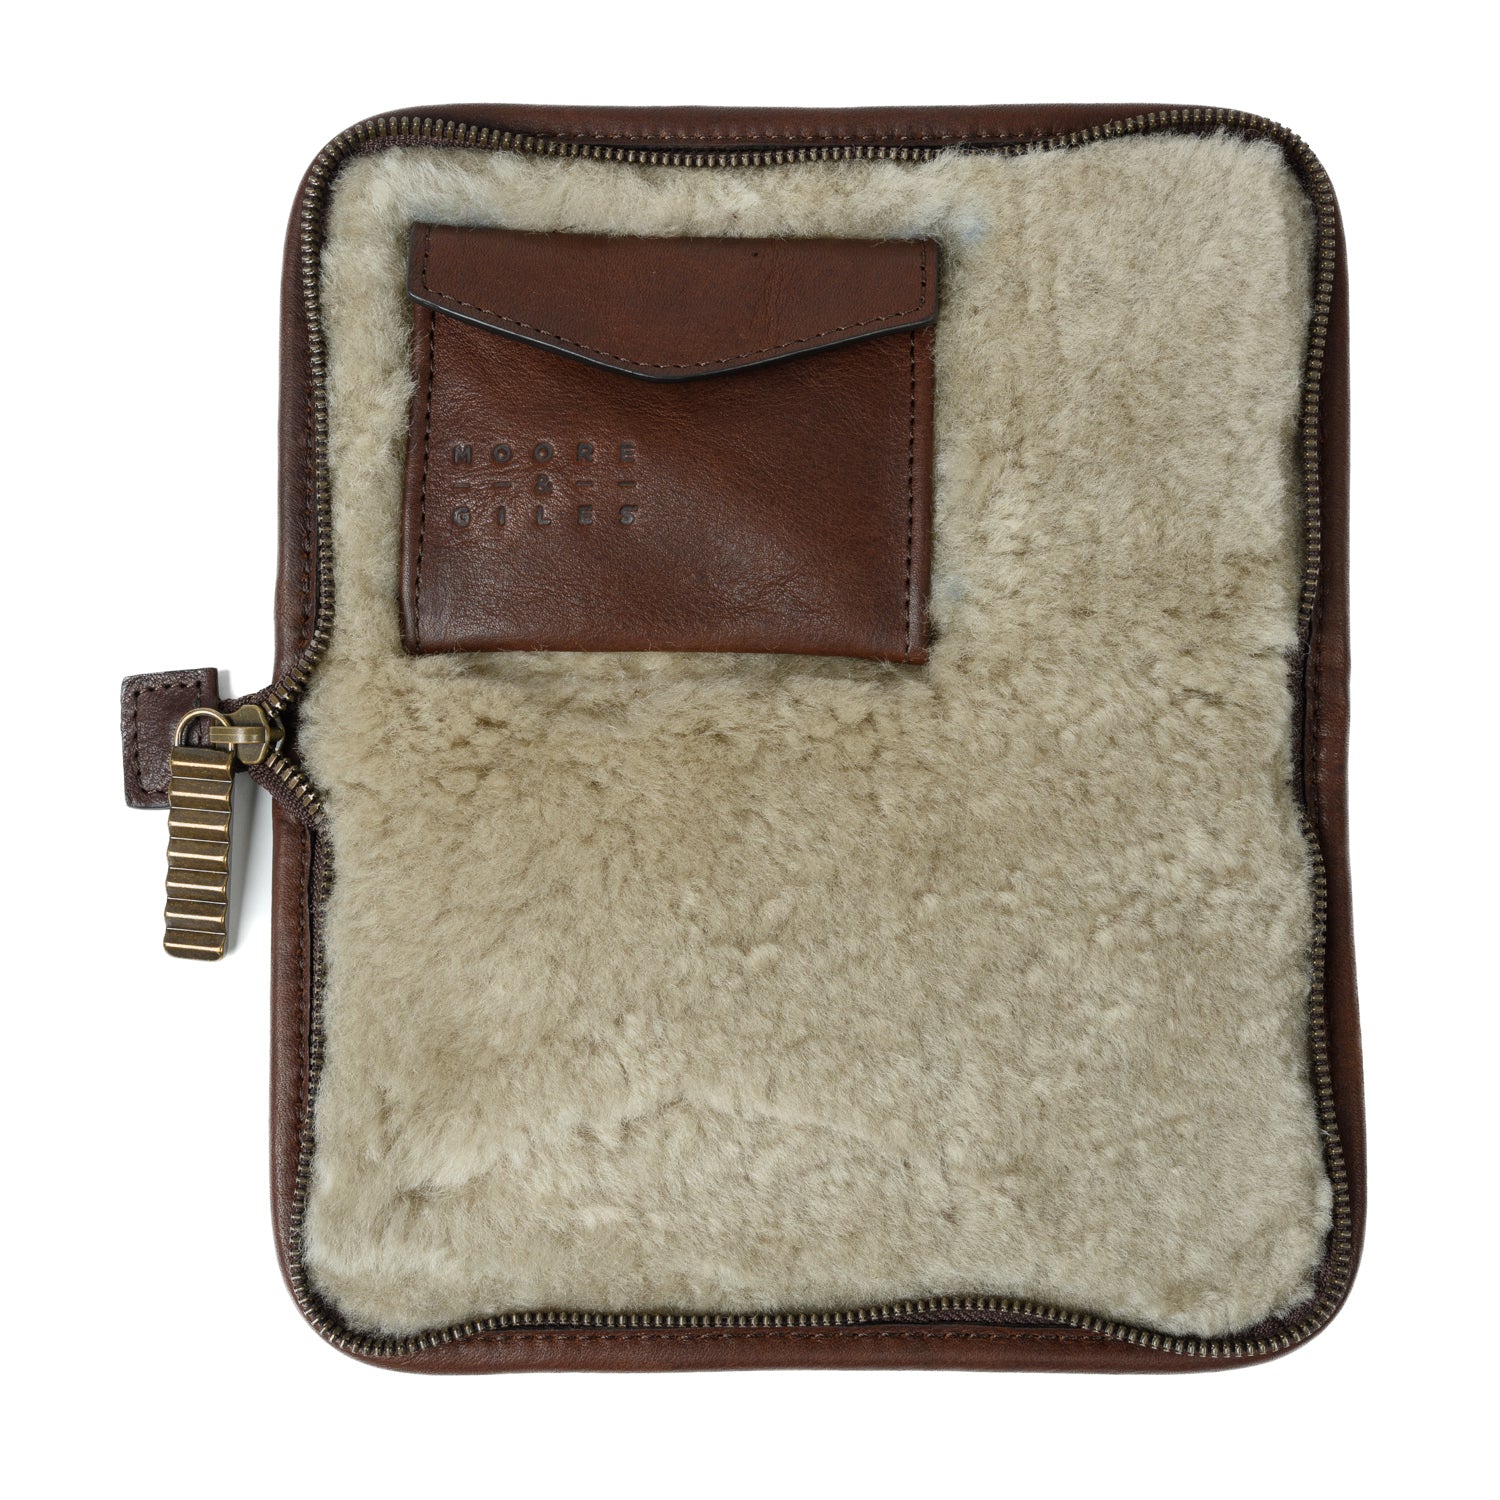 Shearling Lined Accessories Case in Seven Hills Chocolate by Moore & Giles